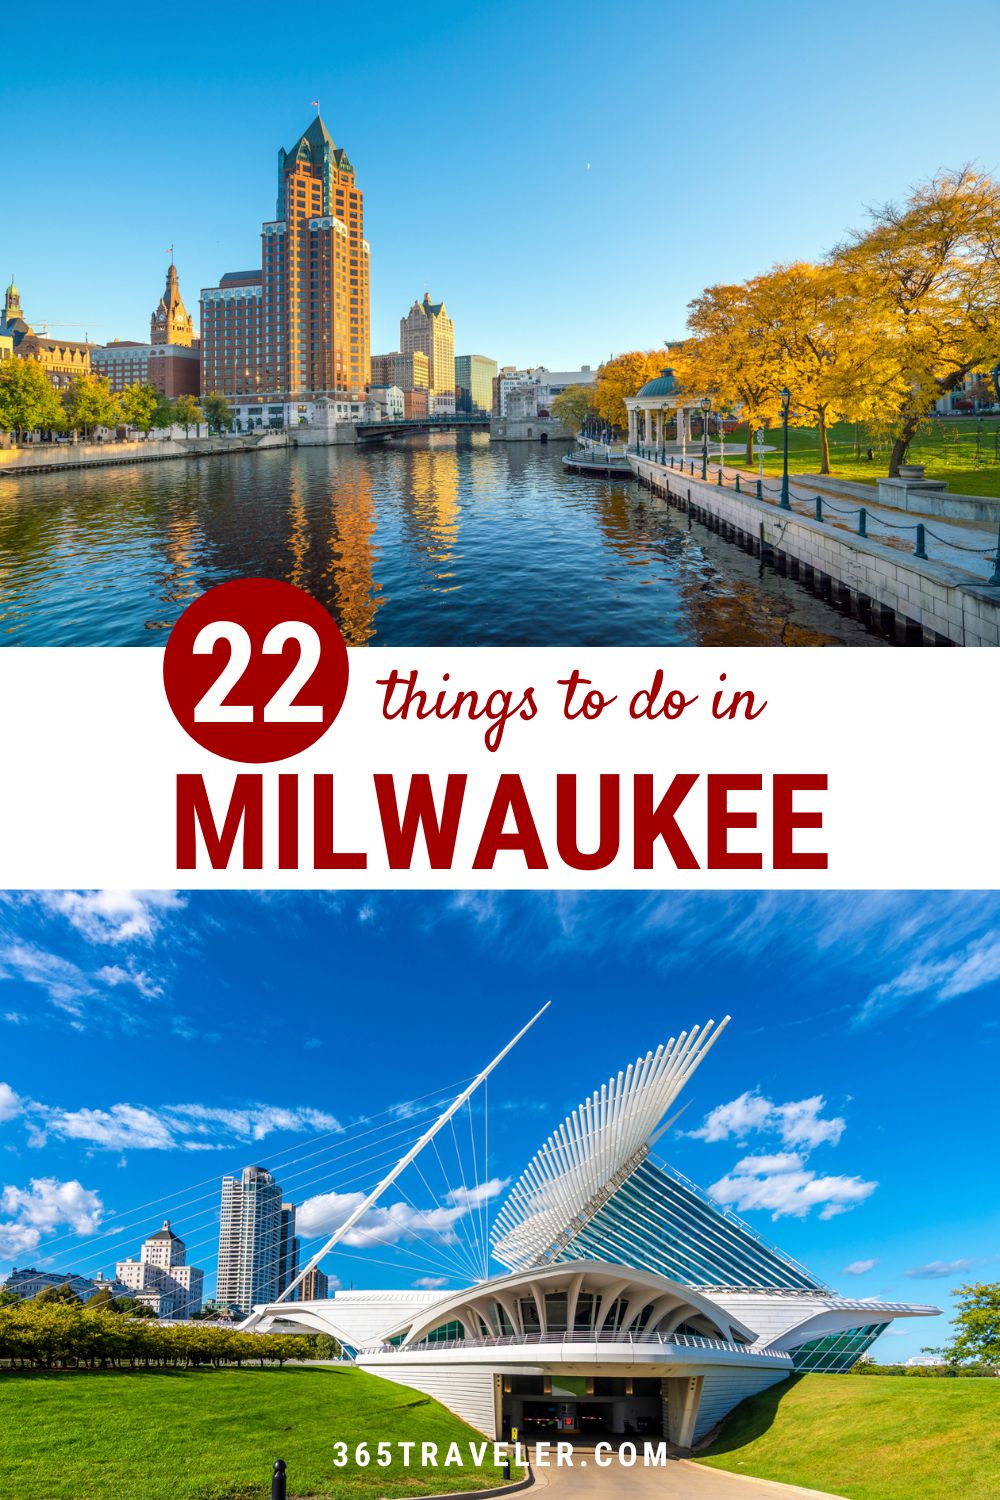 22 Amazing Things To Do in Milwaukee, Wisconsin